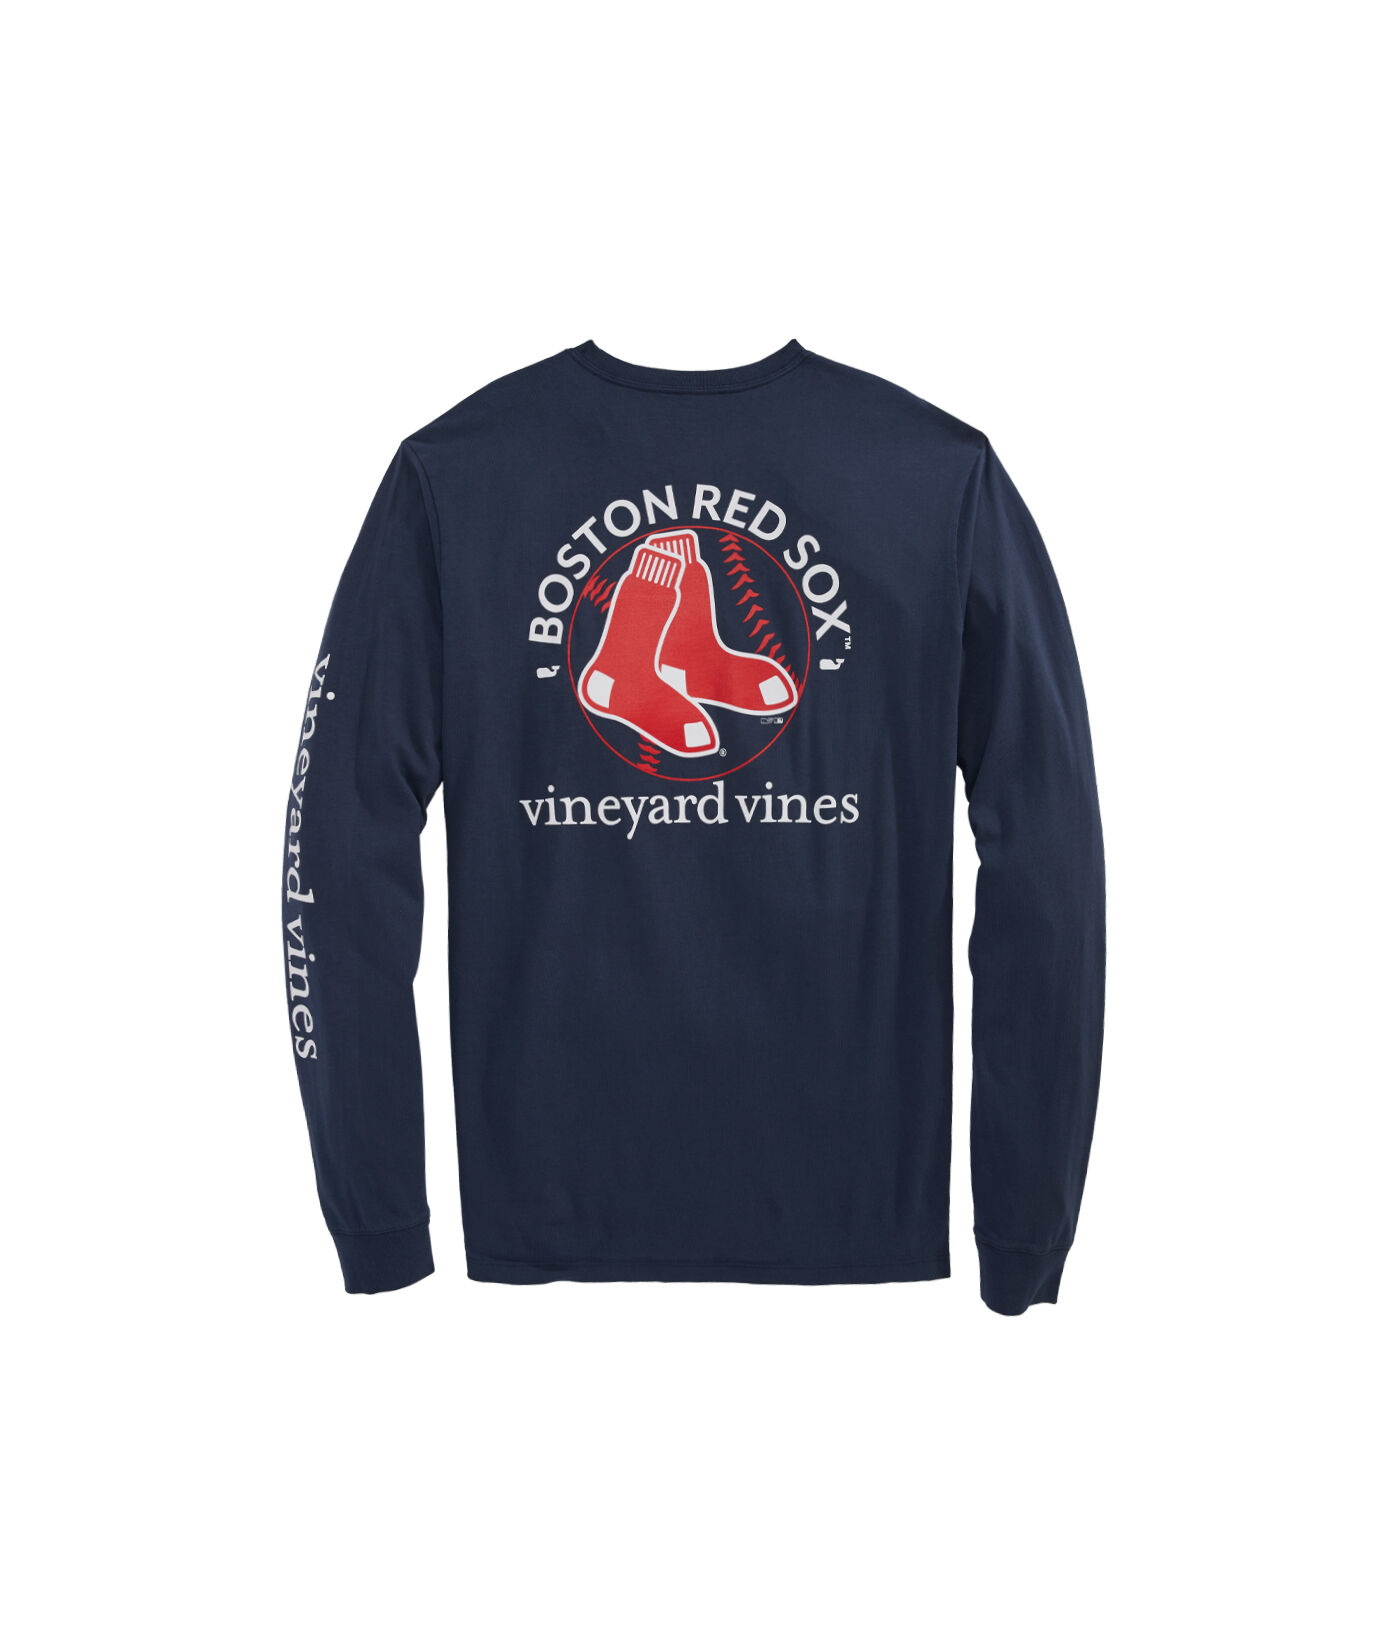 red sox long sleeve